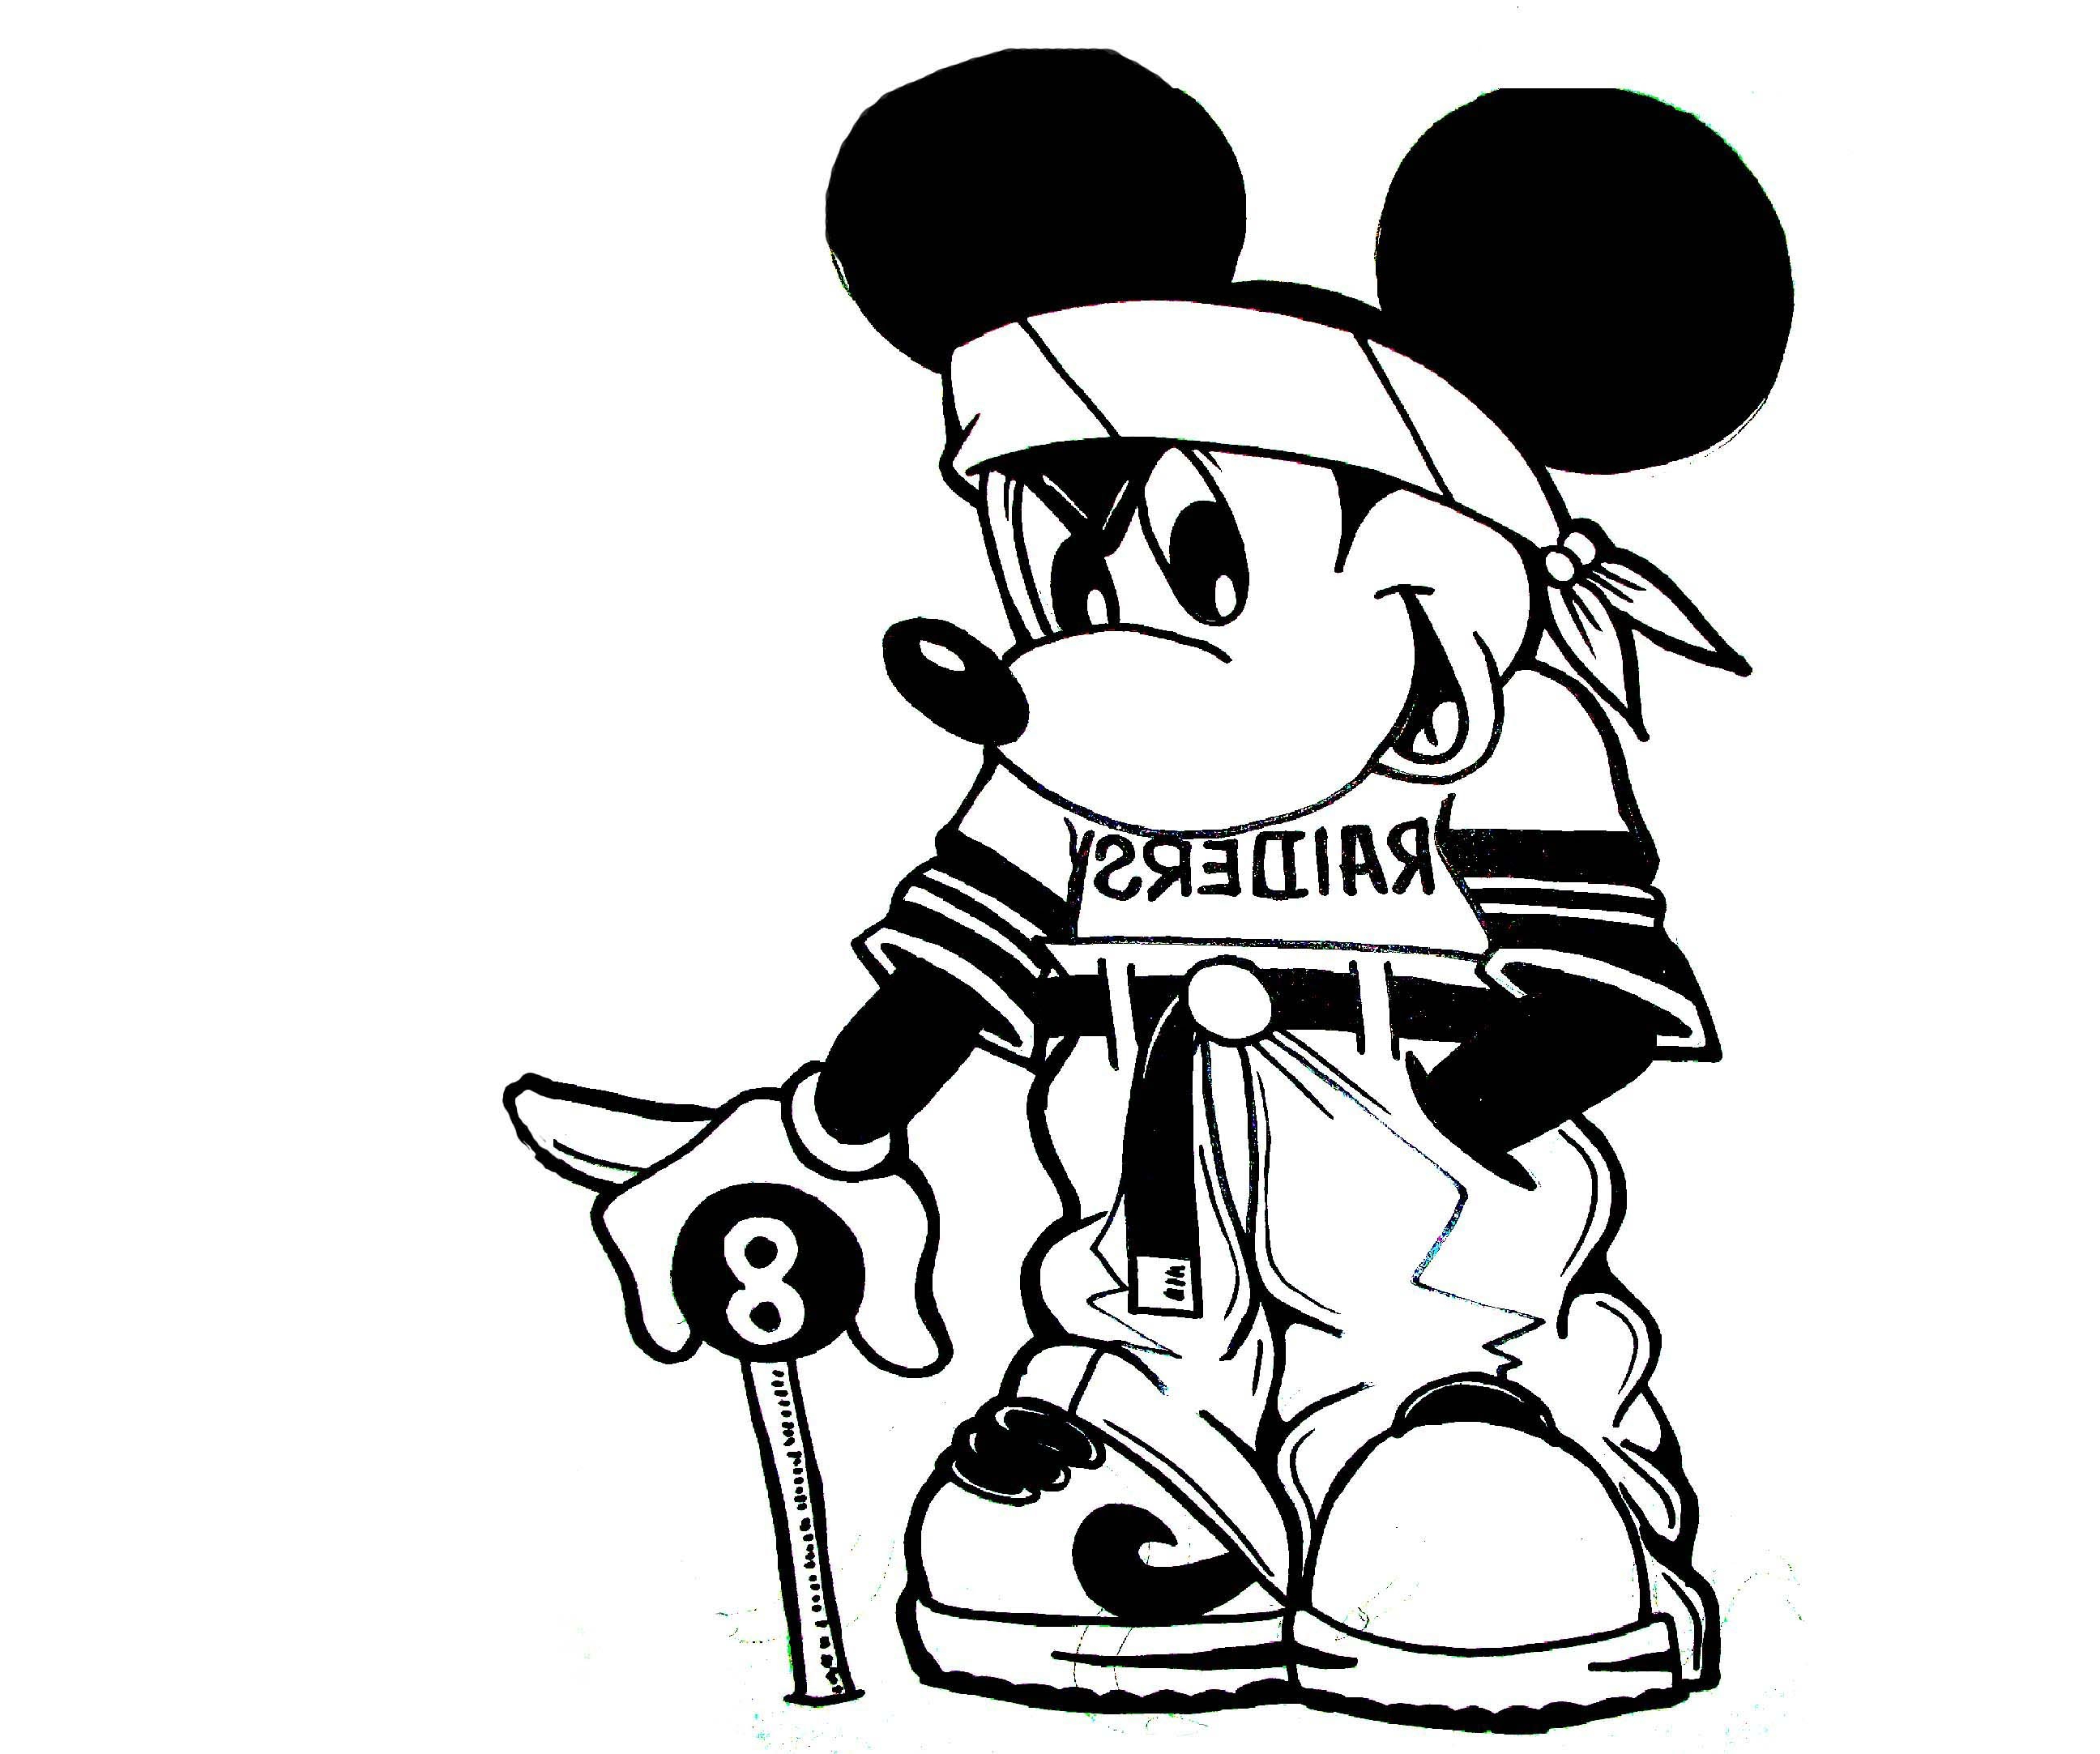 Gangsta Drawings Cartoon Cholo Drawing Mickey Mouse Pencil Gangster Thug Cl...